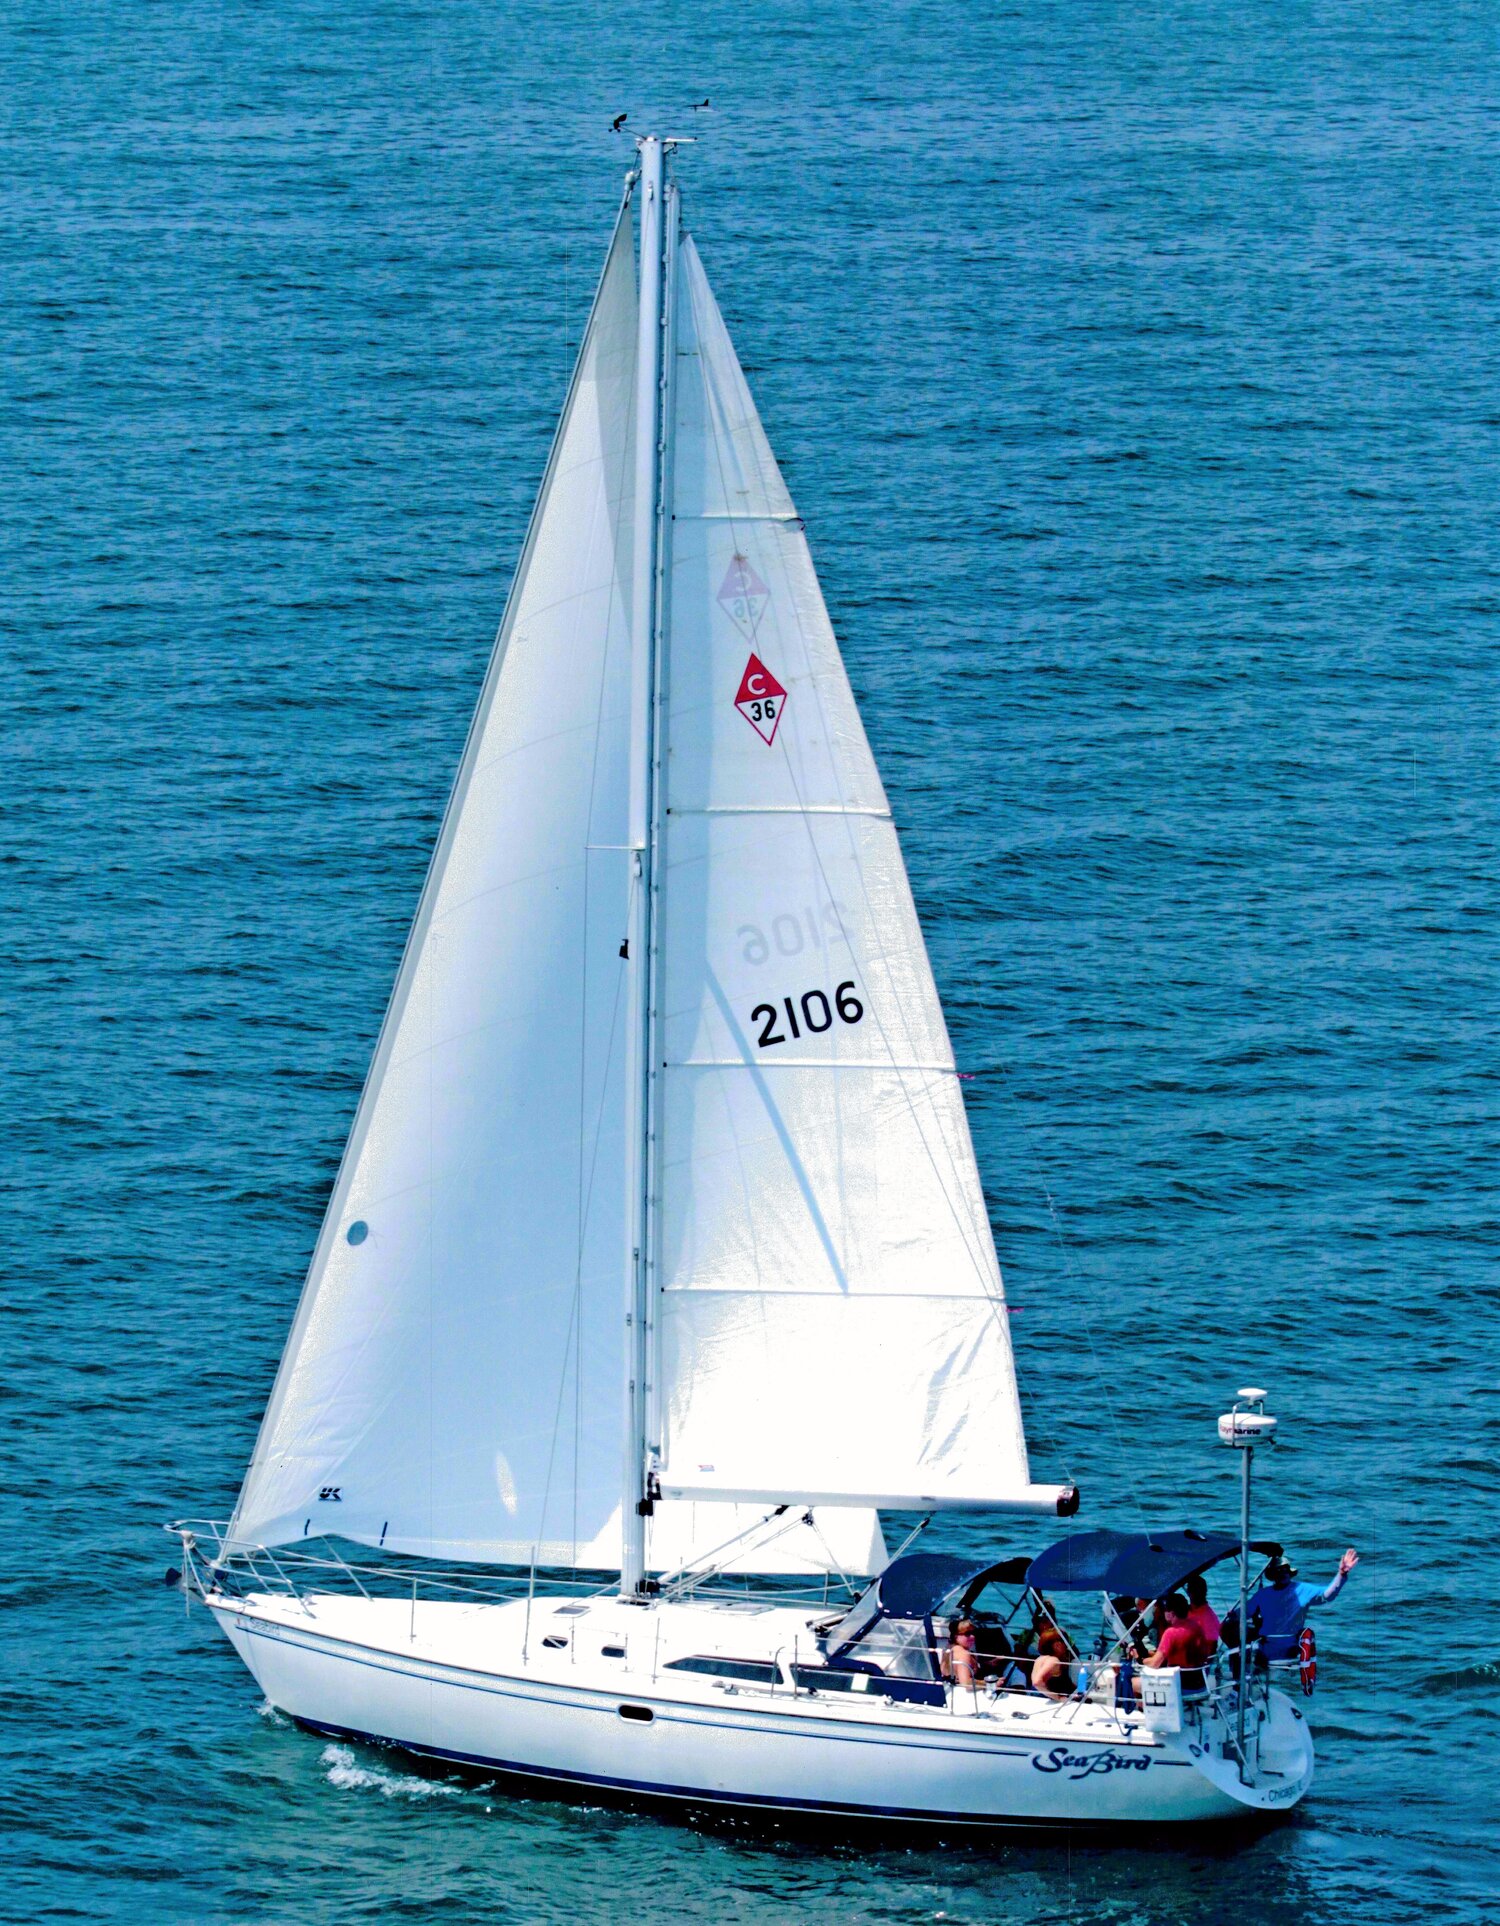 The Boat Sailing Charters Chicago Boat Rental